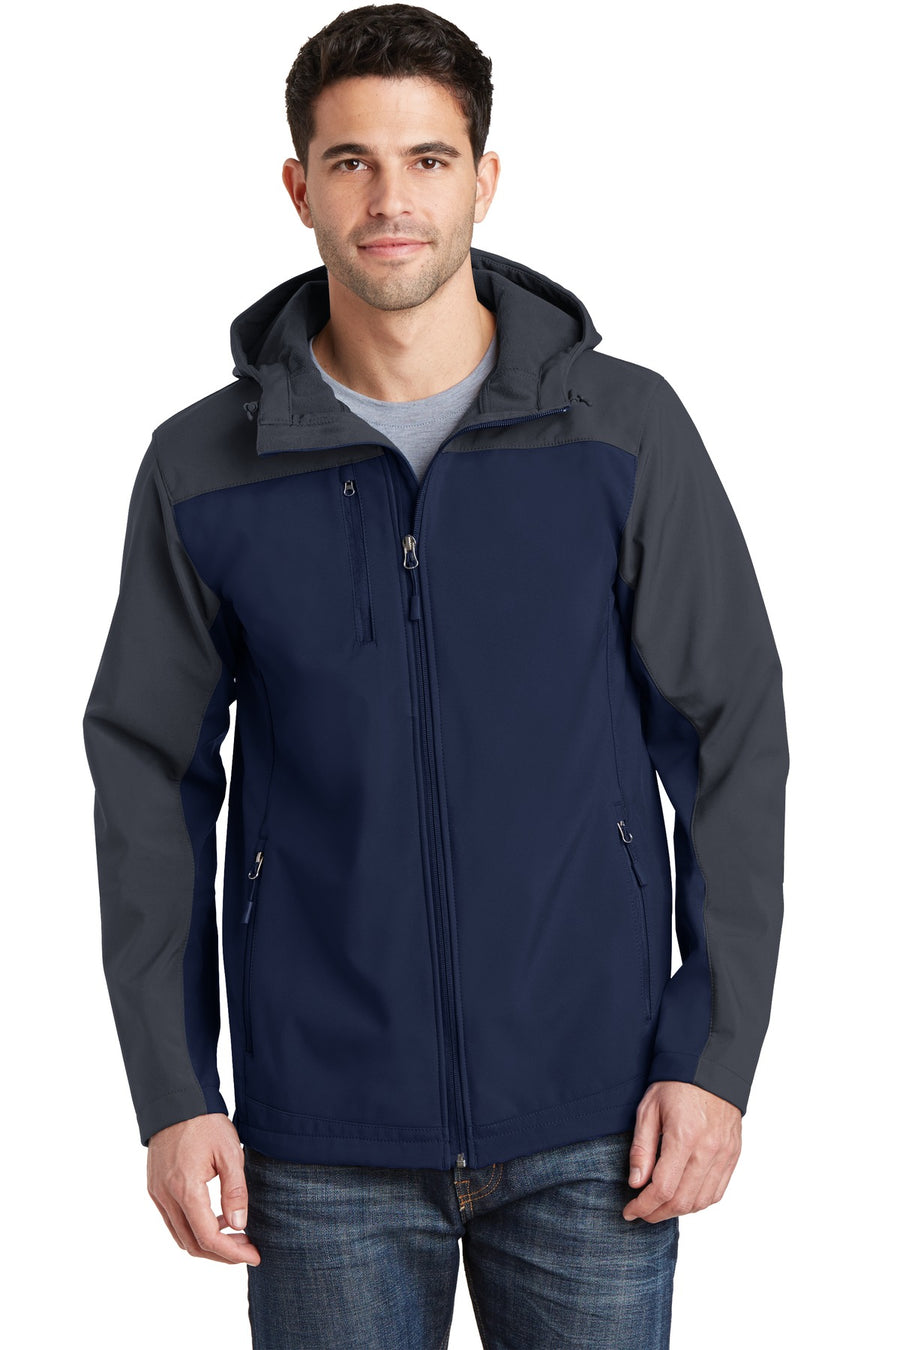 Port Authority Hooded Core Soft Shell Jacket.